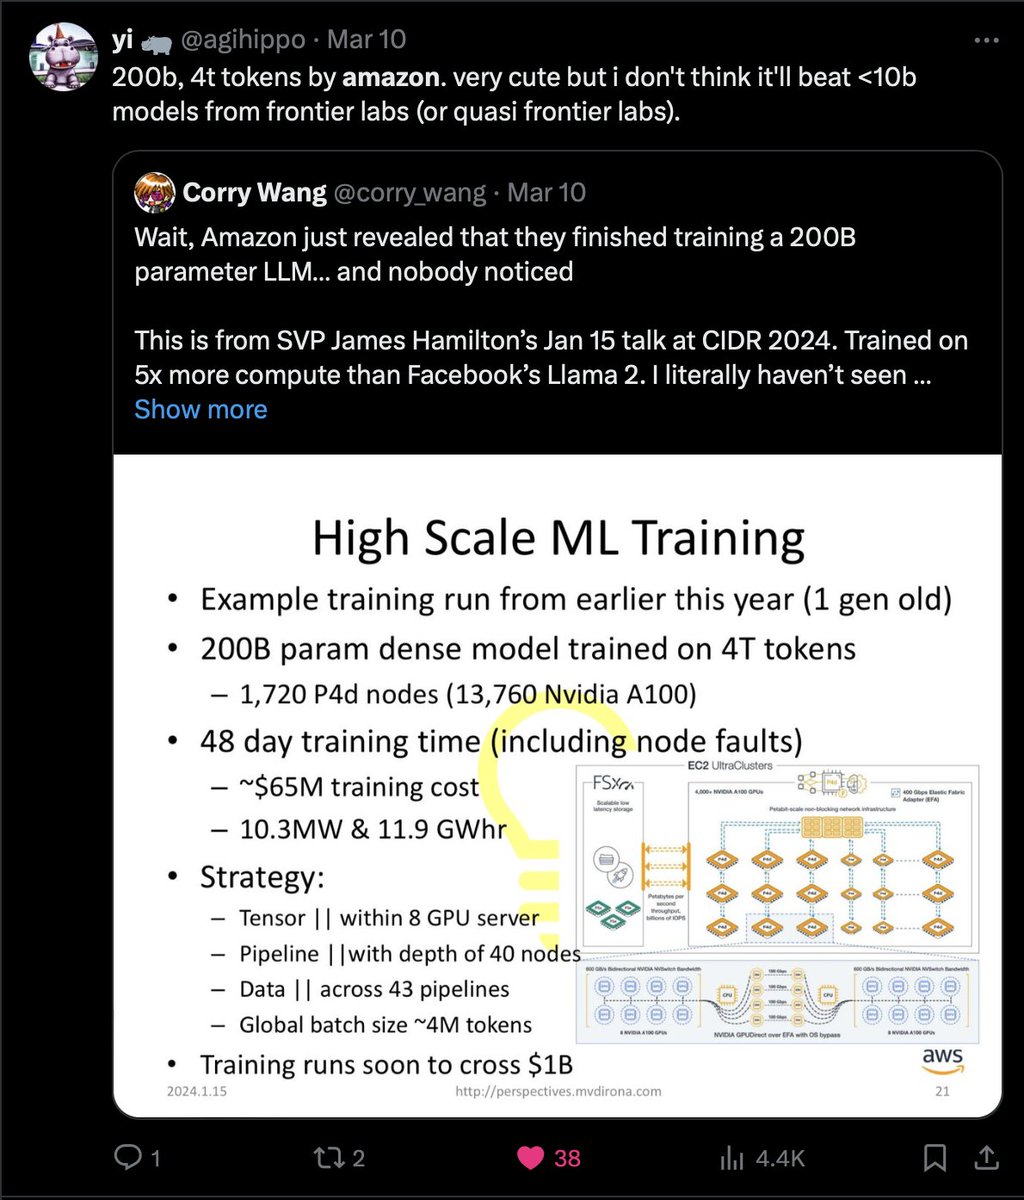 And in contrast to dunks on Aidan Gomez or Mistral doomerism, this has aged well. DBRX has become the new Falcon-180B.
A pity. It seems that the Amazon model in ≈GPT-4 cost class is the same way. Having expertise in getting GPUs to run at high MFU is *NOT NEARLY* enough.